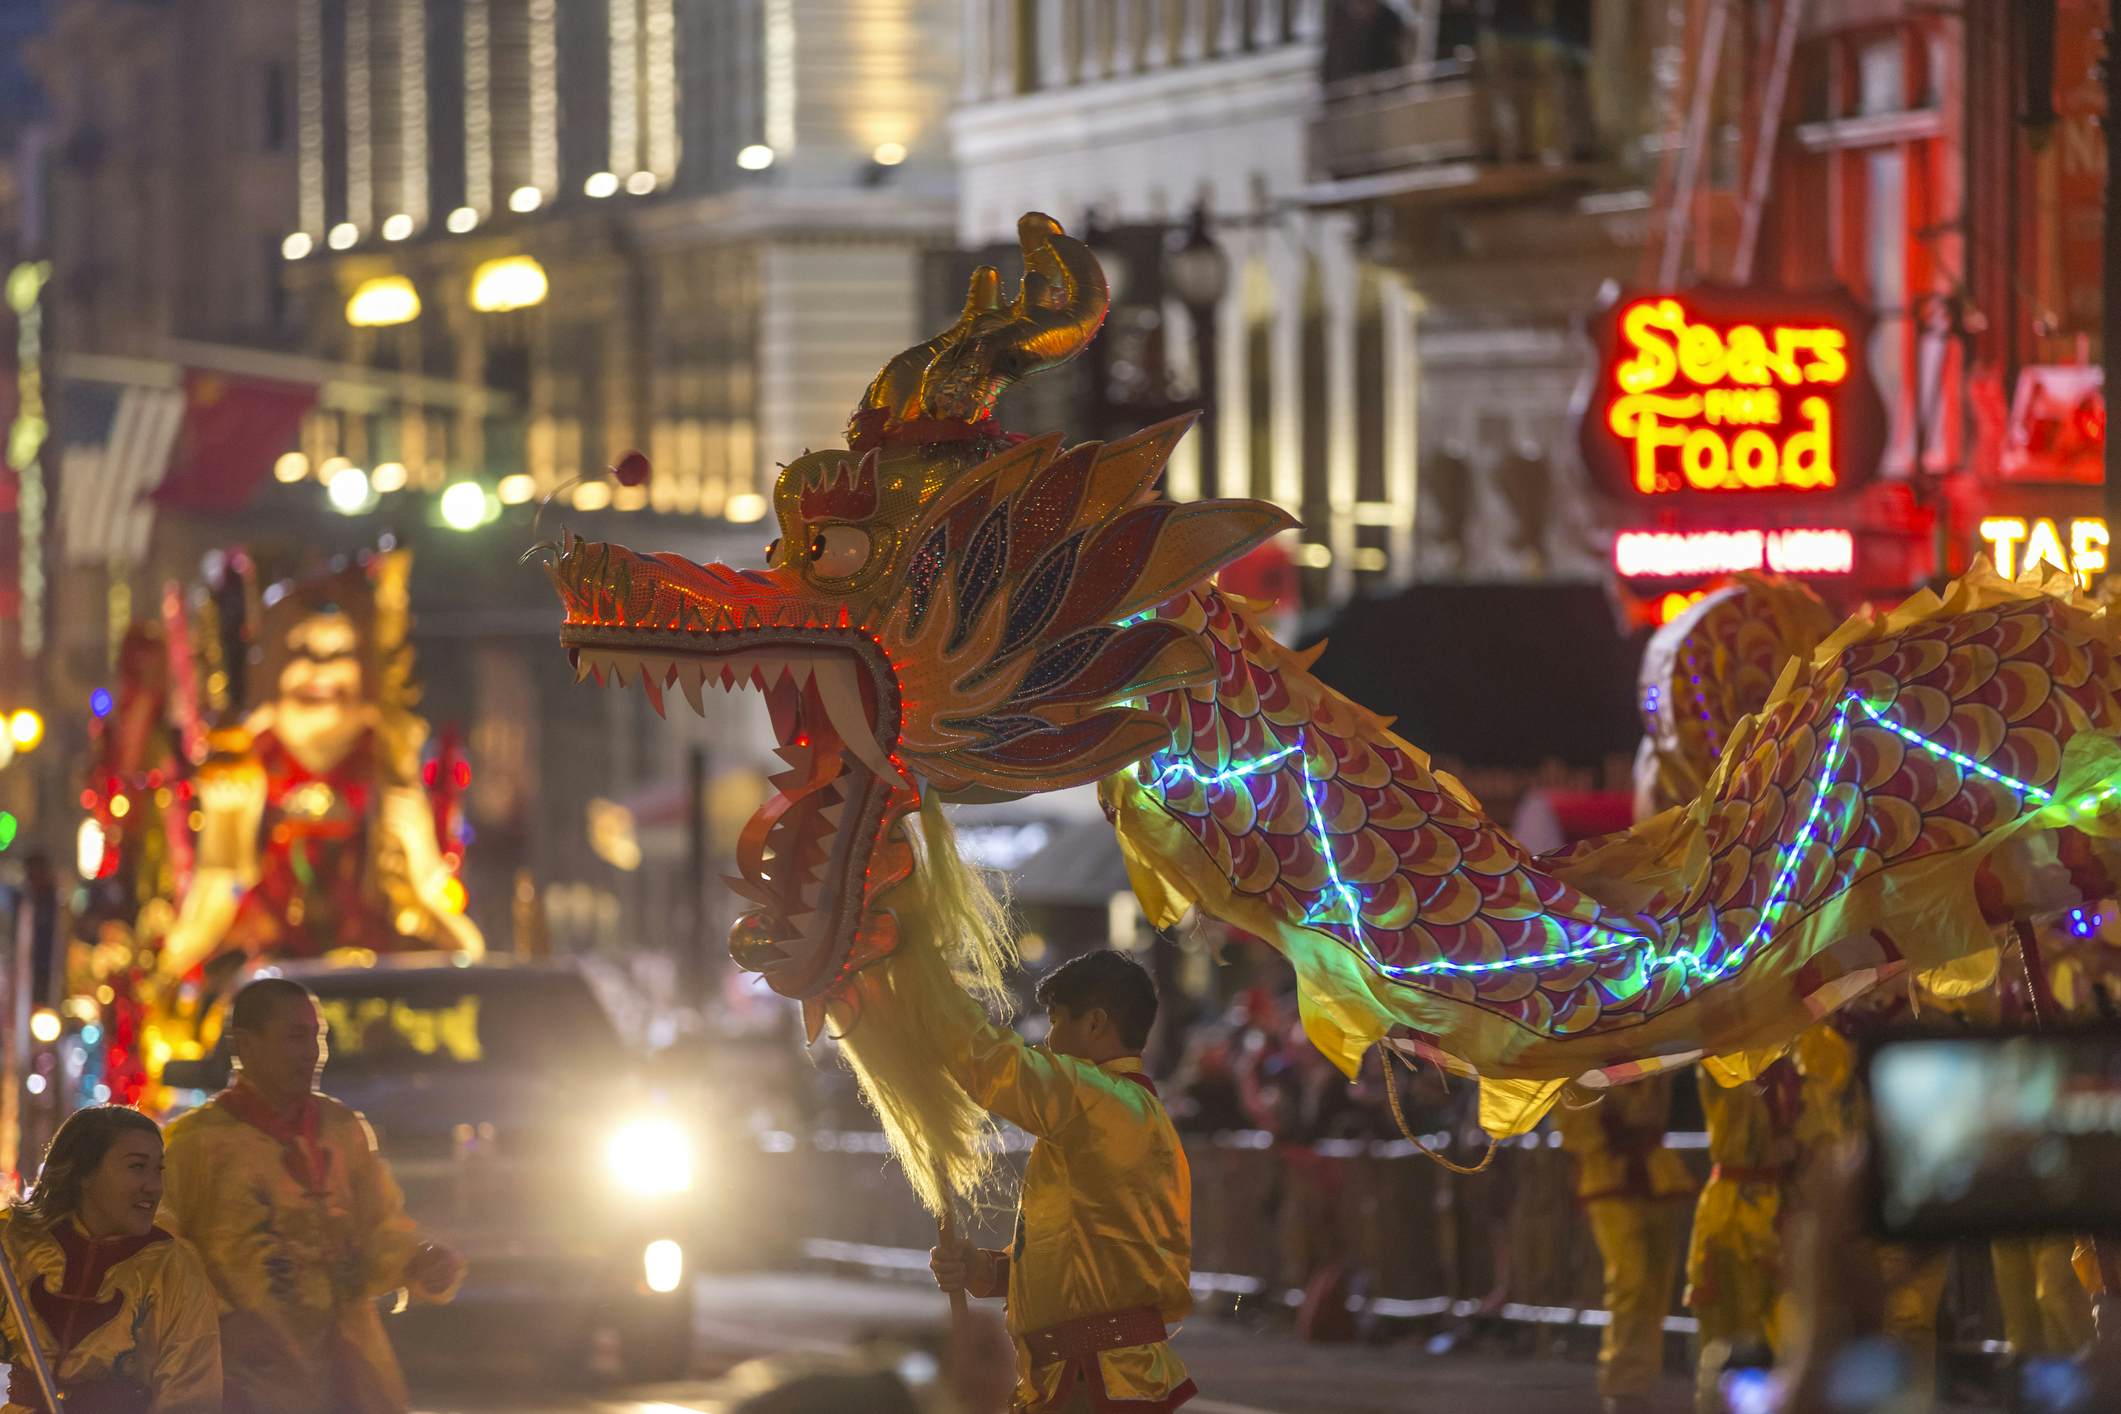 The 12 Best Places to Celebrate Chinese New Year